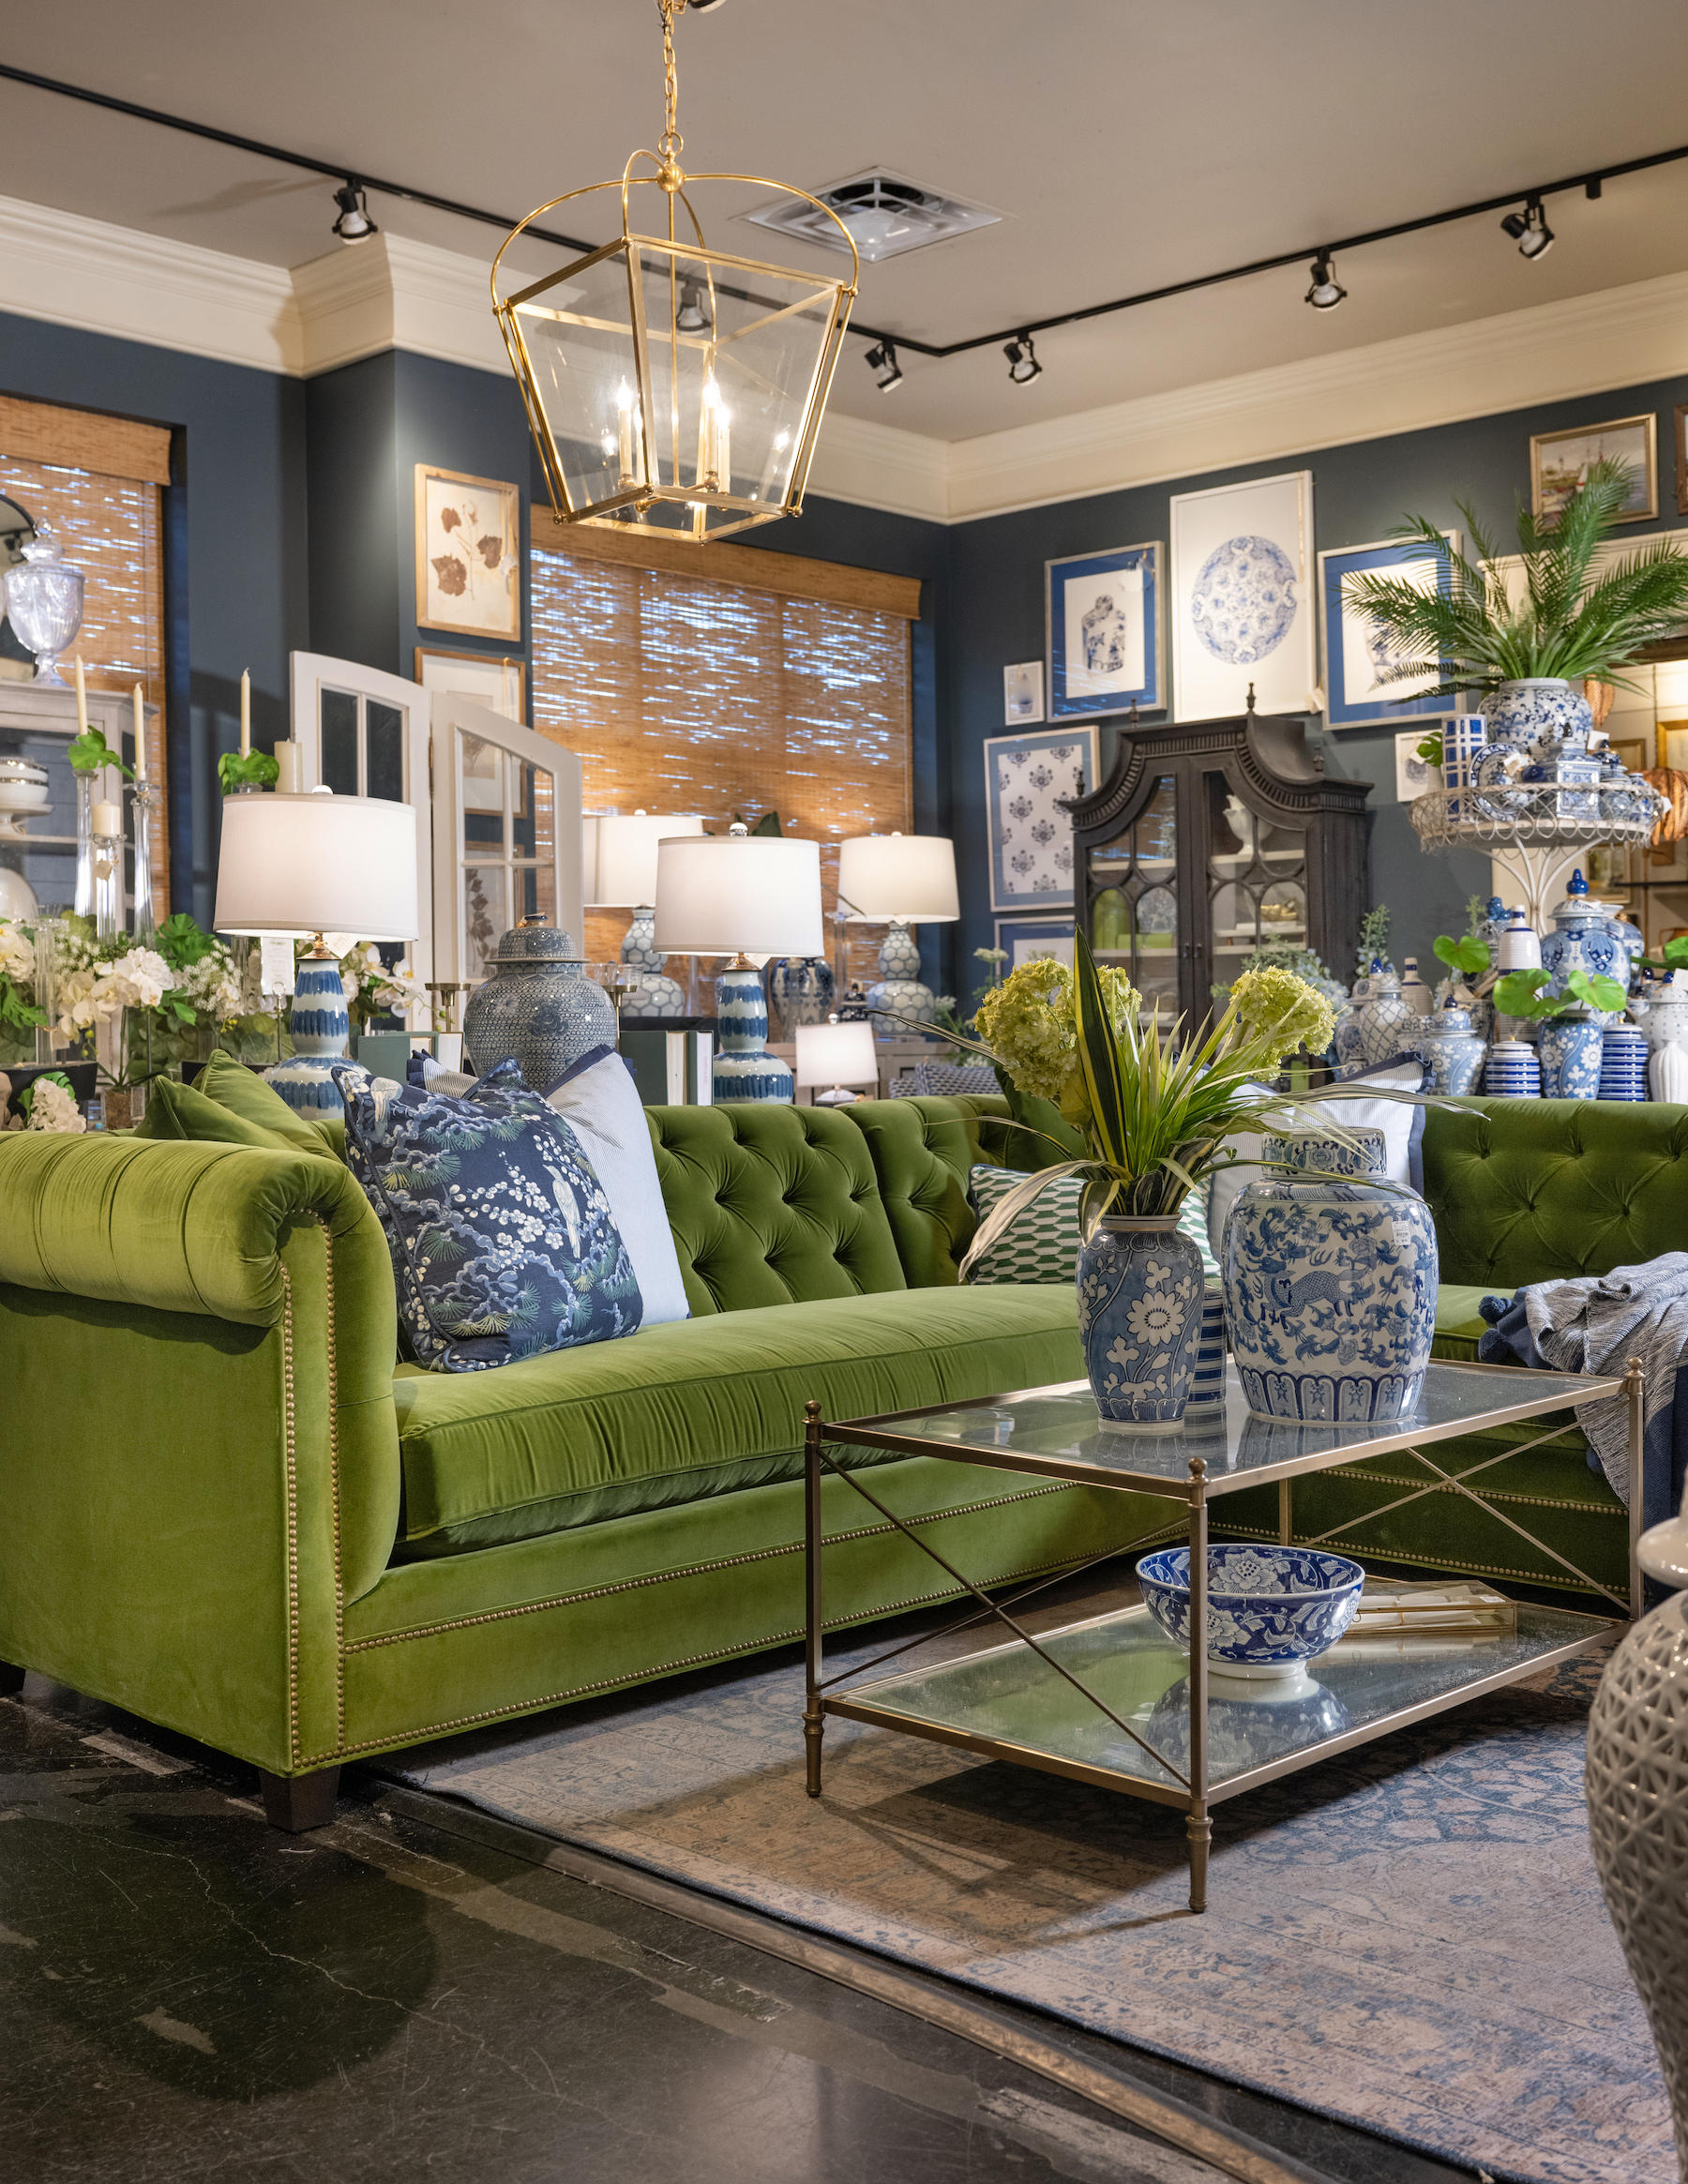 DECORATING WITH SHADES OF GREEN